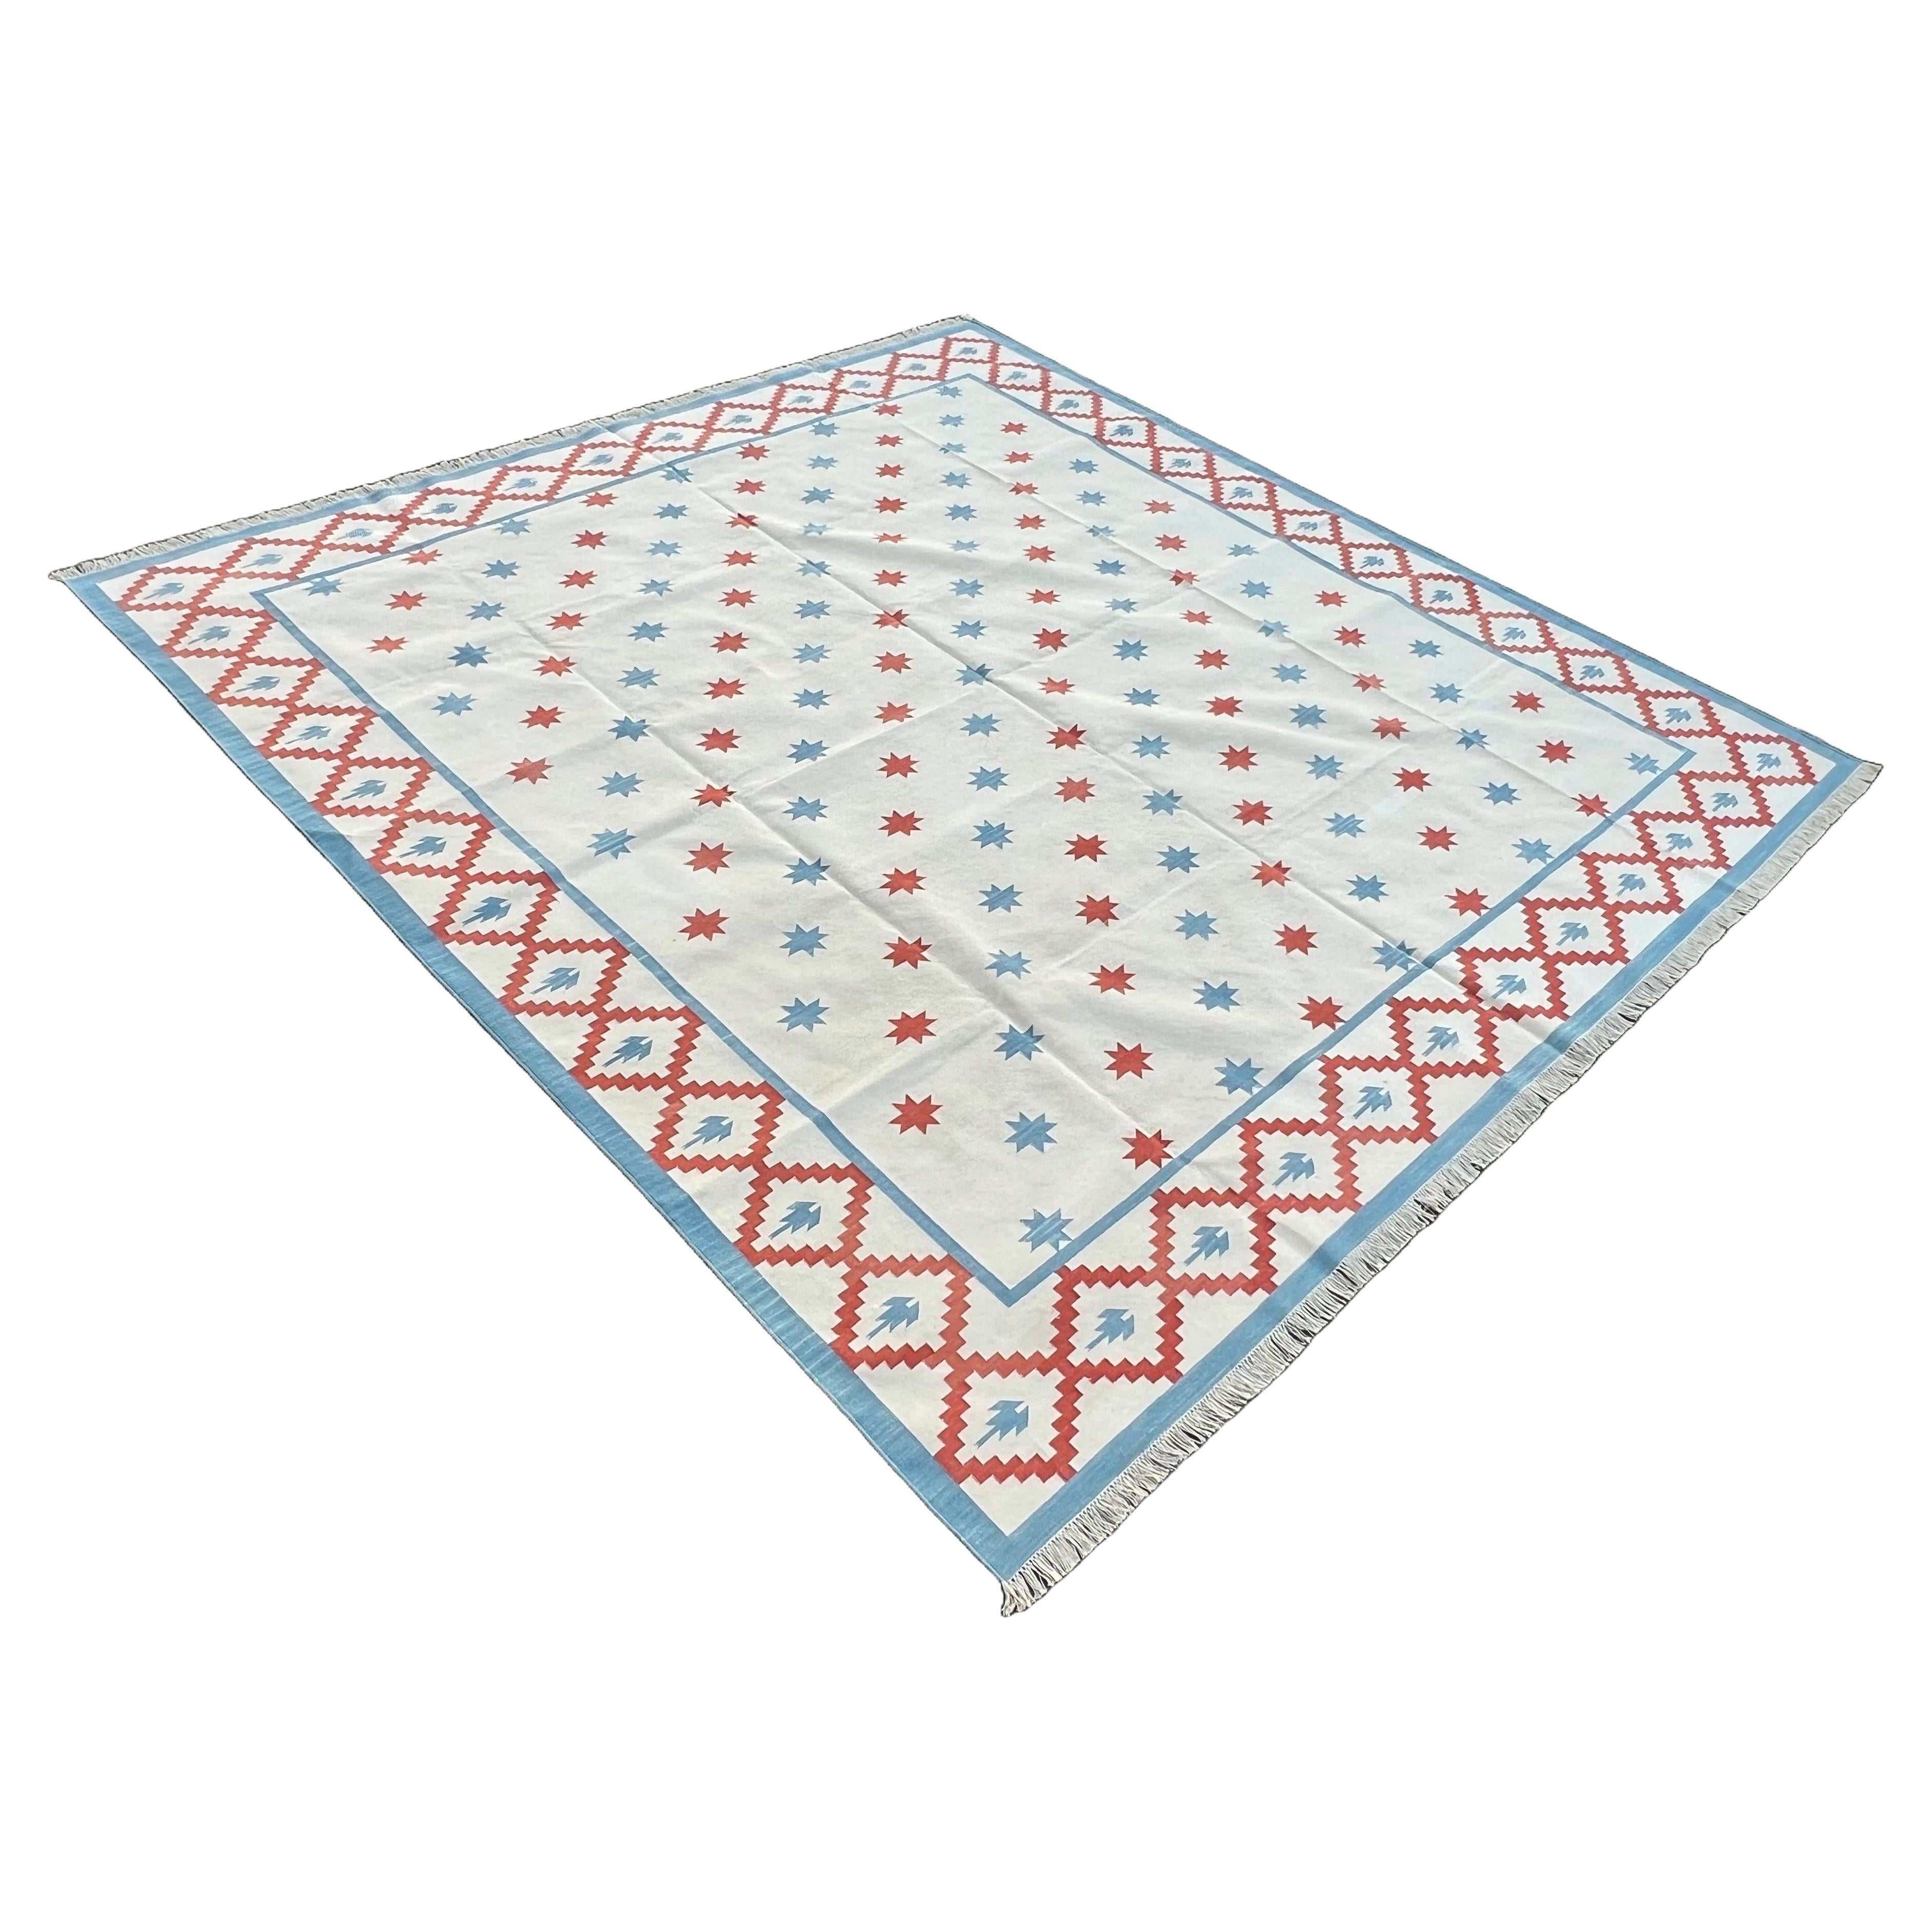 Handmade Cotton Area Flat Weave Rug, Cream And Red Indian Star Geometric Dhurrie For Sale